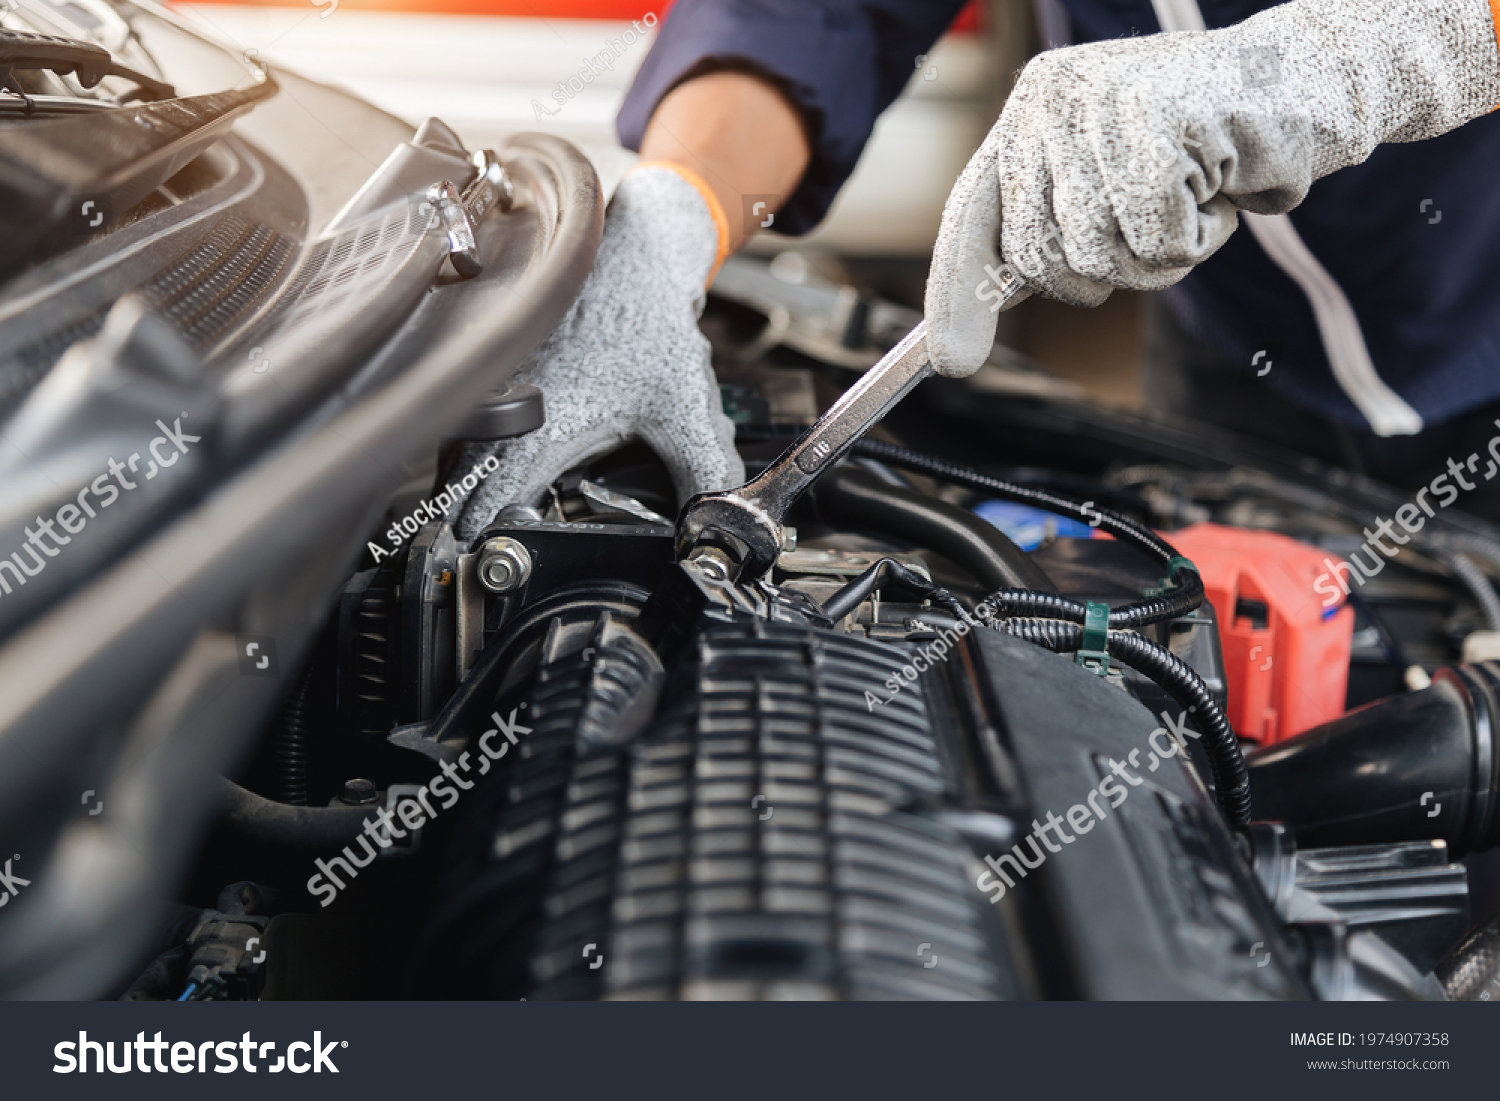 Automobile mechanic repairman hands repairing a car engine automotive workshop with a wrench, car service and maintenance,Repair service. #1974907358